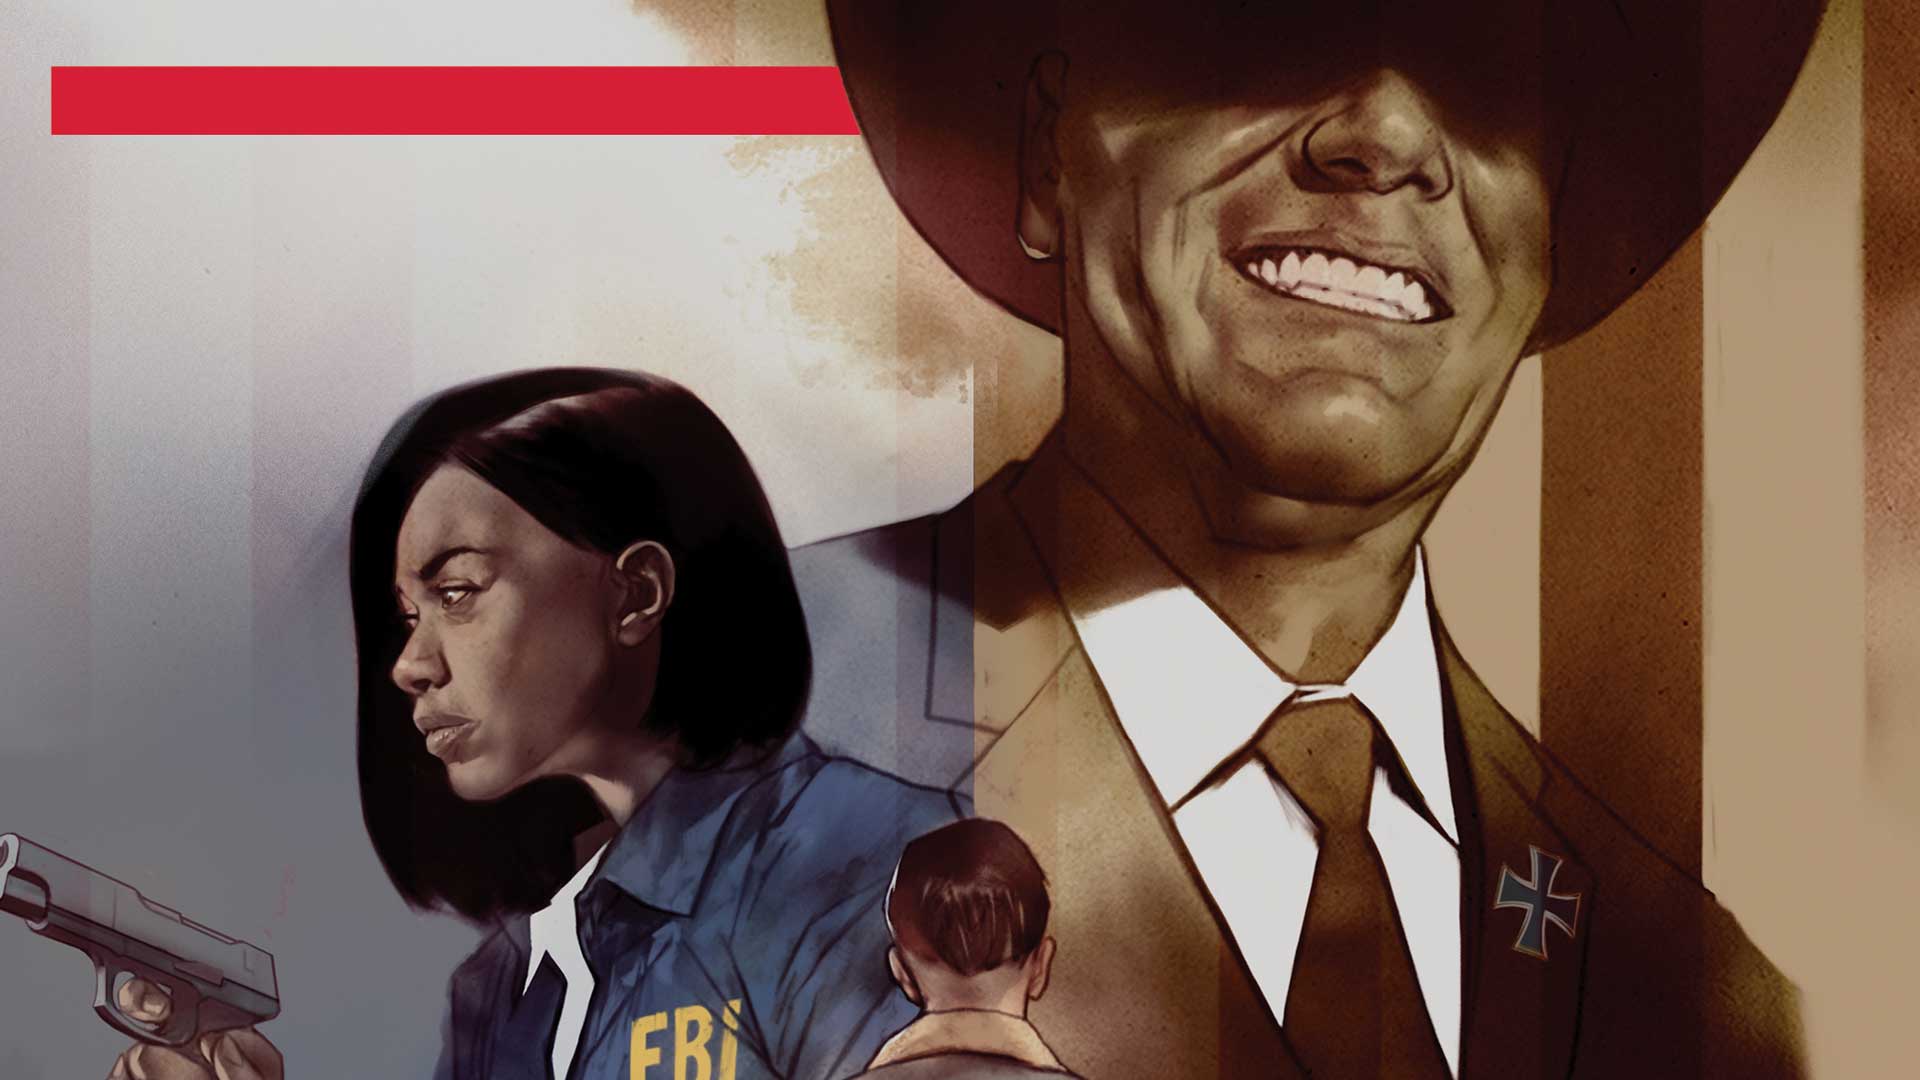 American Carnage # 1 Review: A great comic that deals in harsh realities